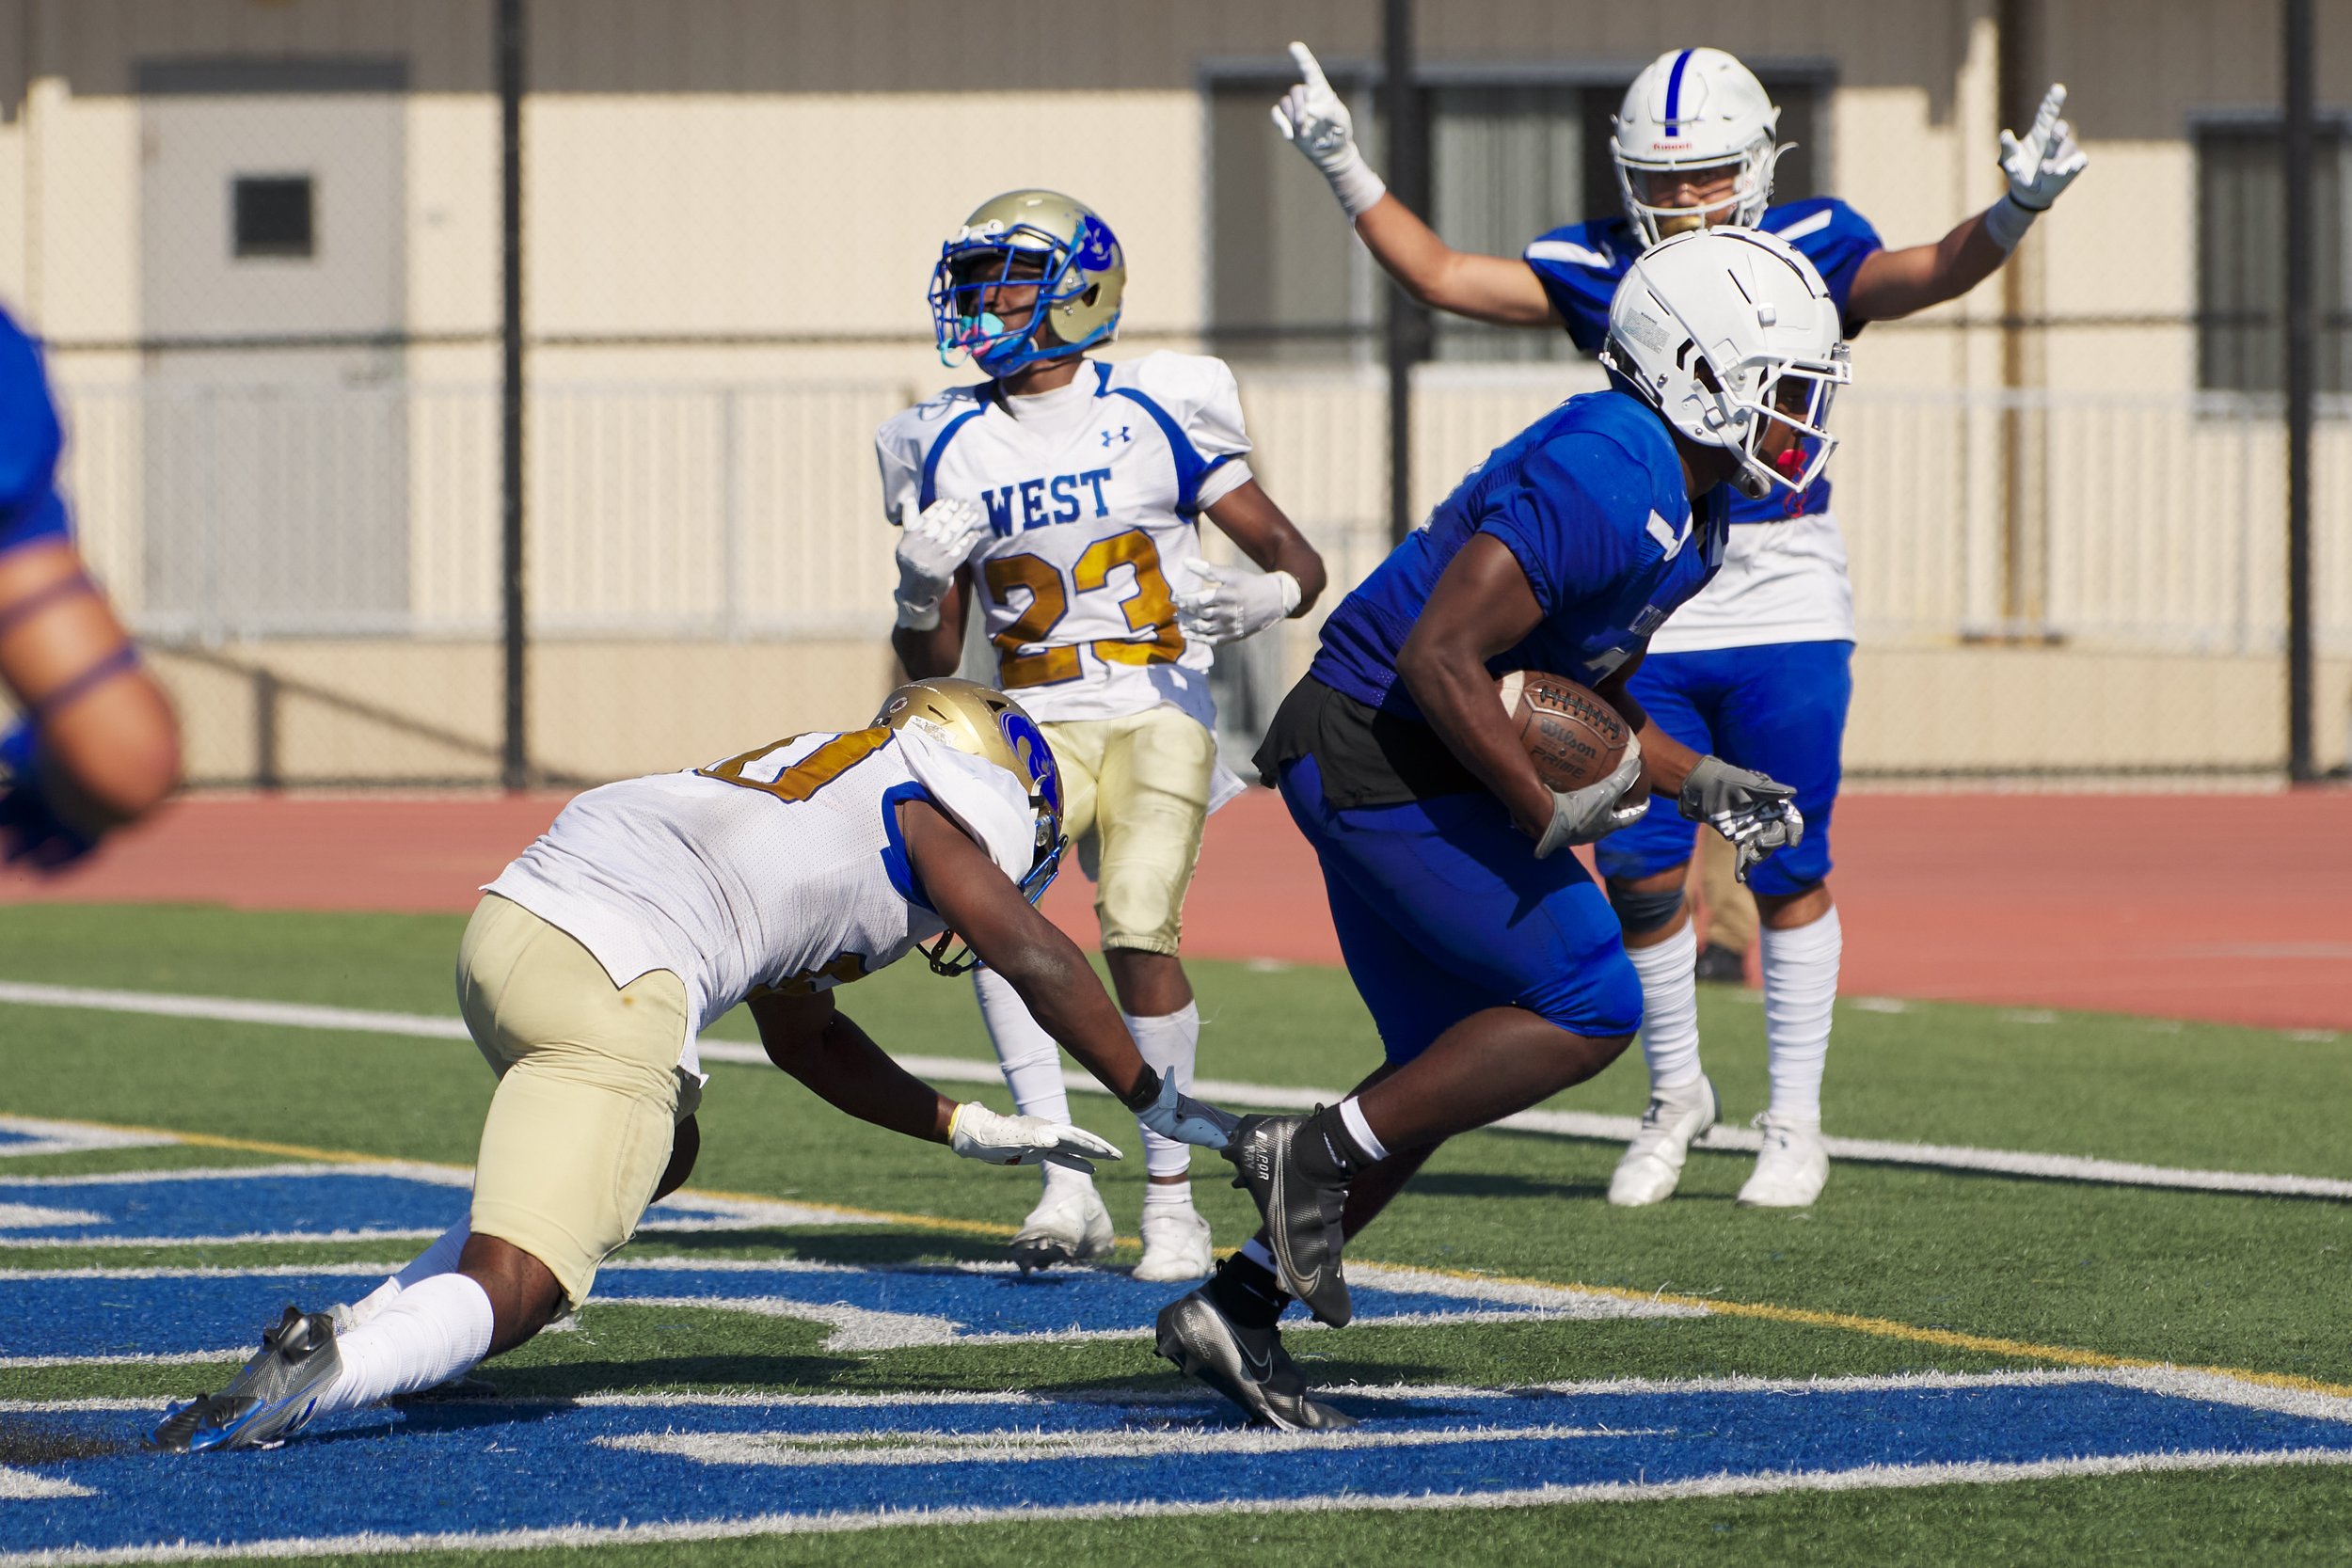  Santa Monica College Corsairs' Myles Parker (front right) scores a touchdown against the West Los Angeles College Wildcats during the football match on Saturday, October 1, 2022, at Corsair Field in Santa Monica, Calif. The Corsairs won 41-40. (Nich